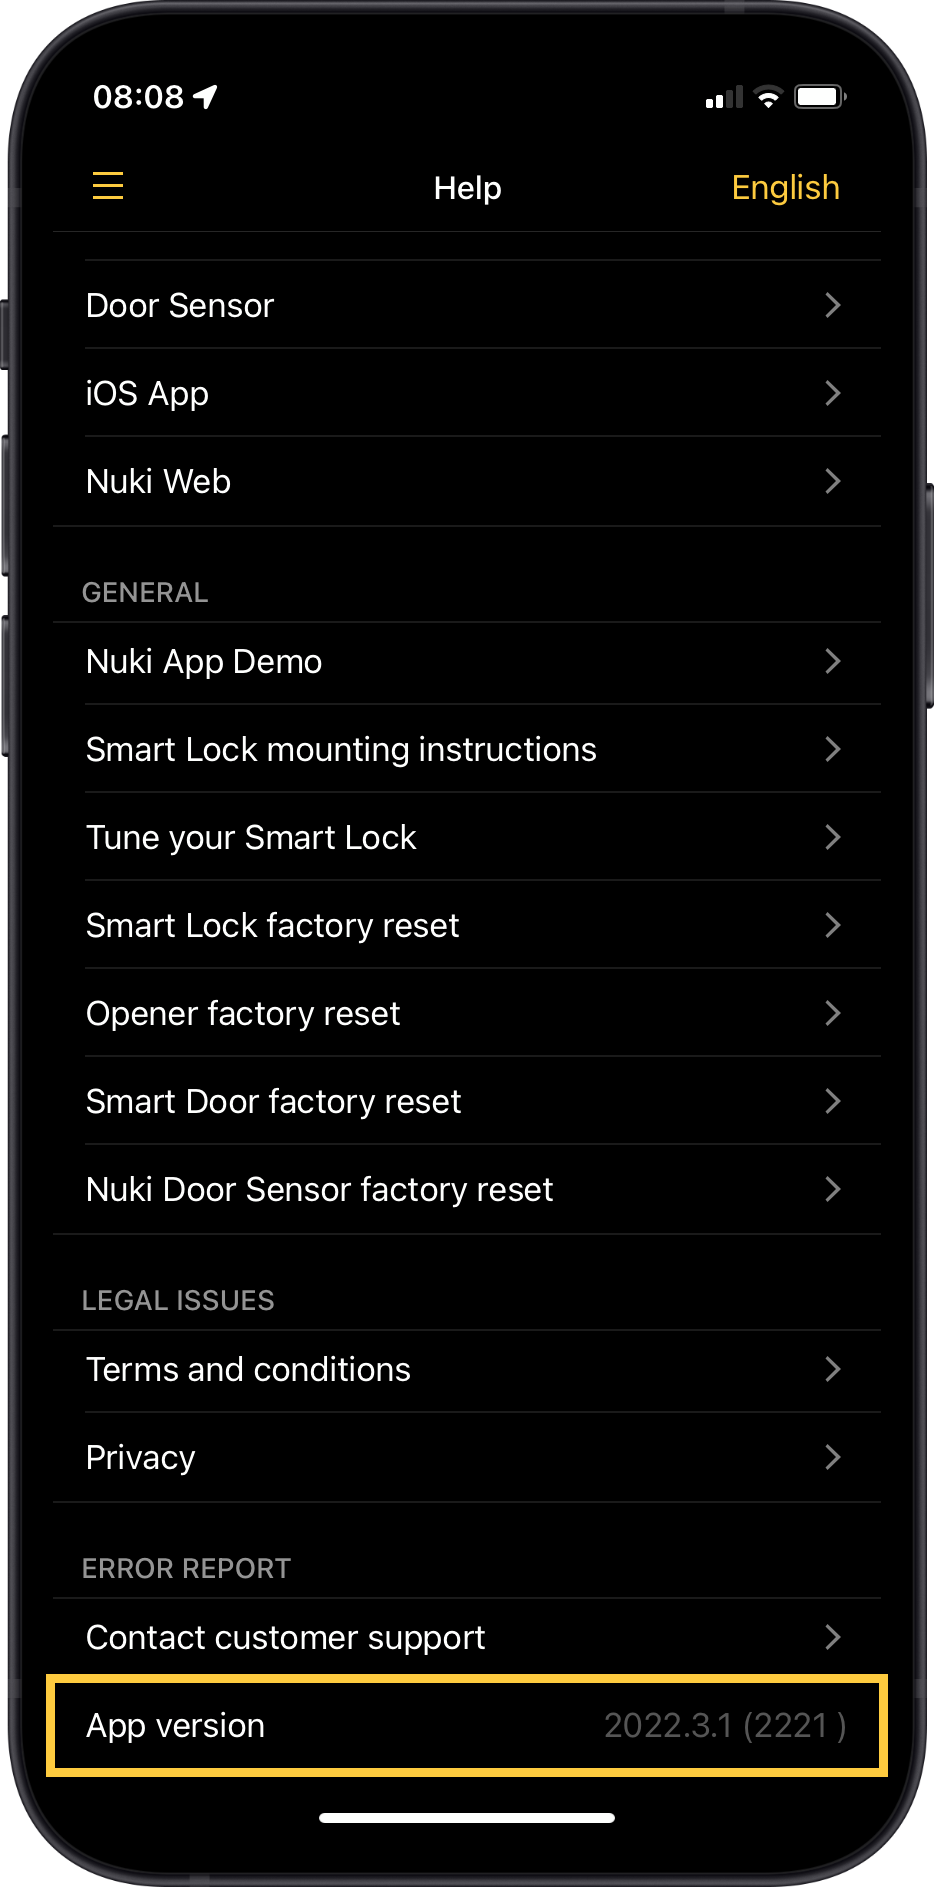 For more transparency and a better overview: new version numbering of the Nuki App releases